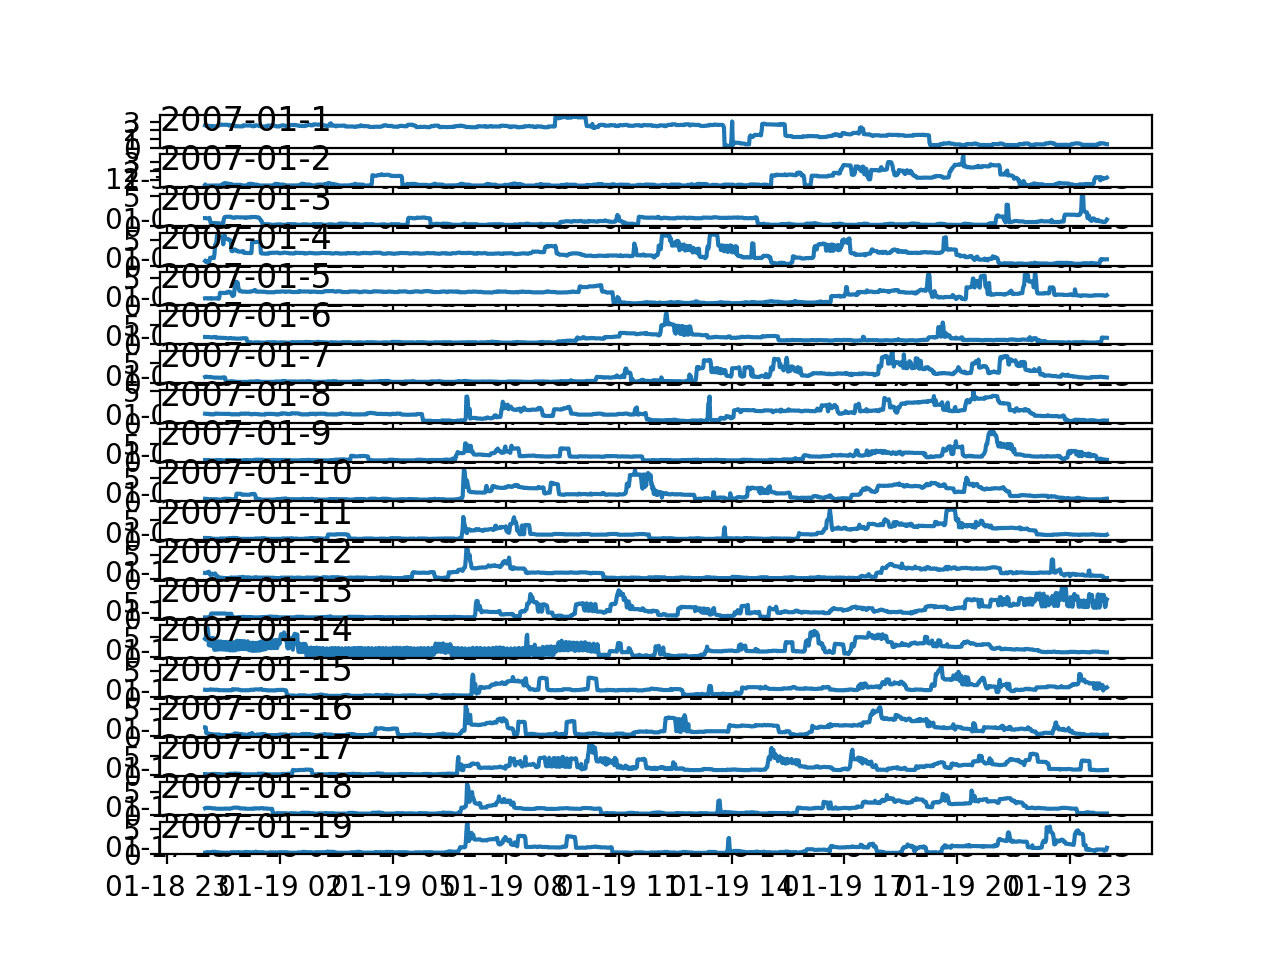 Line Plots for Active Power for 20 Days in One Month